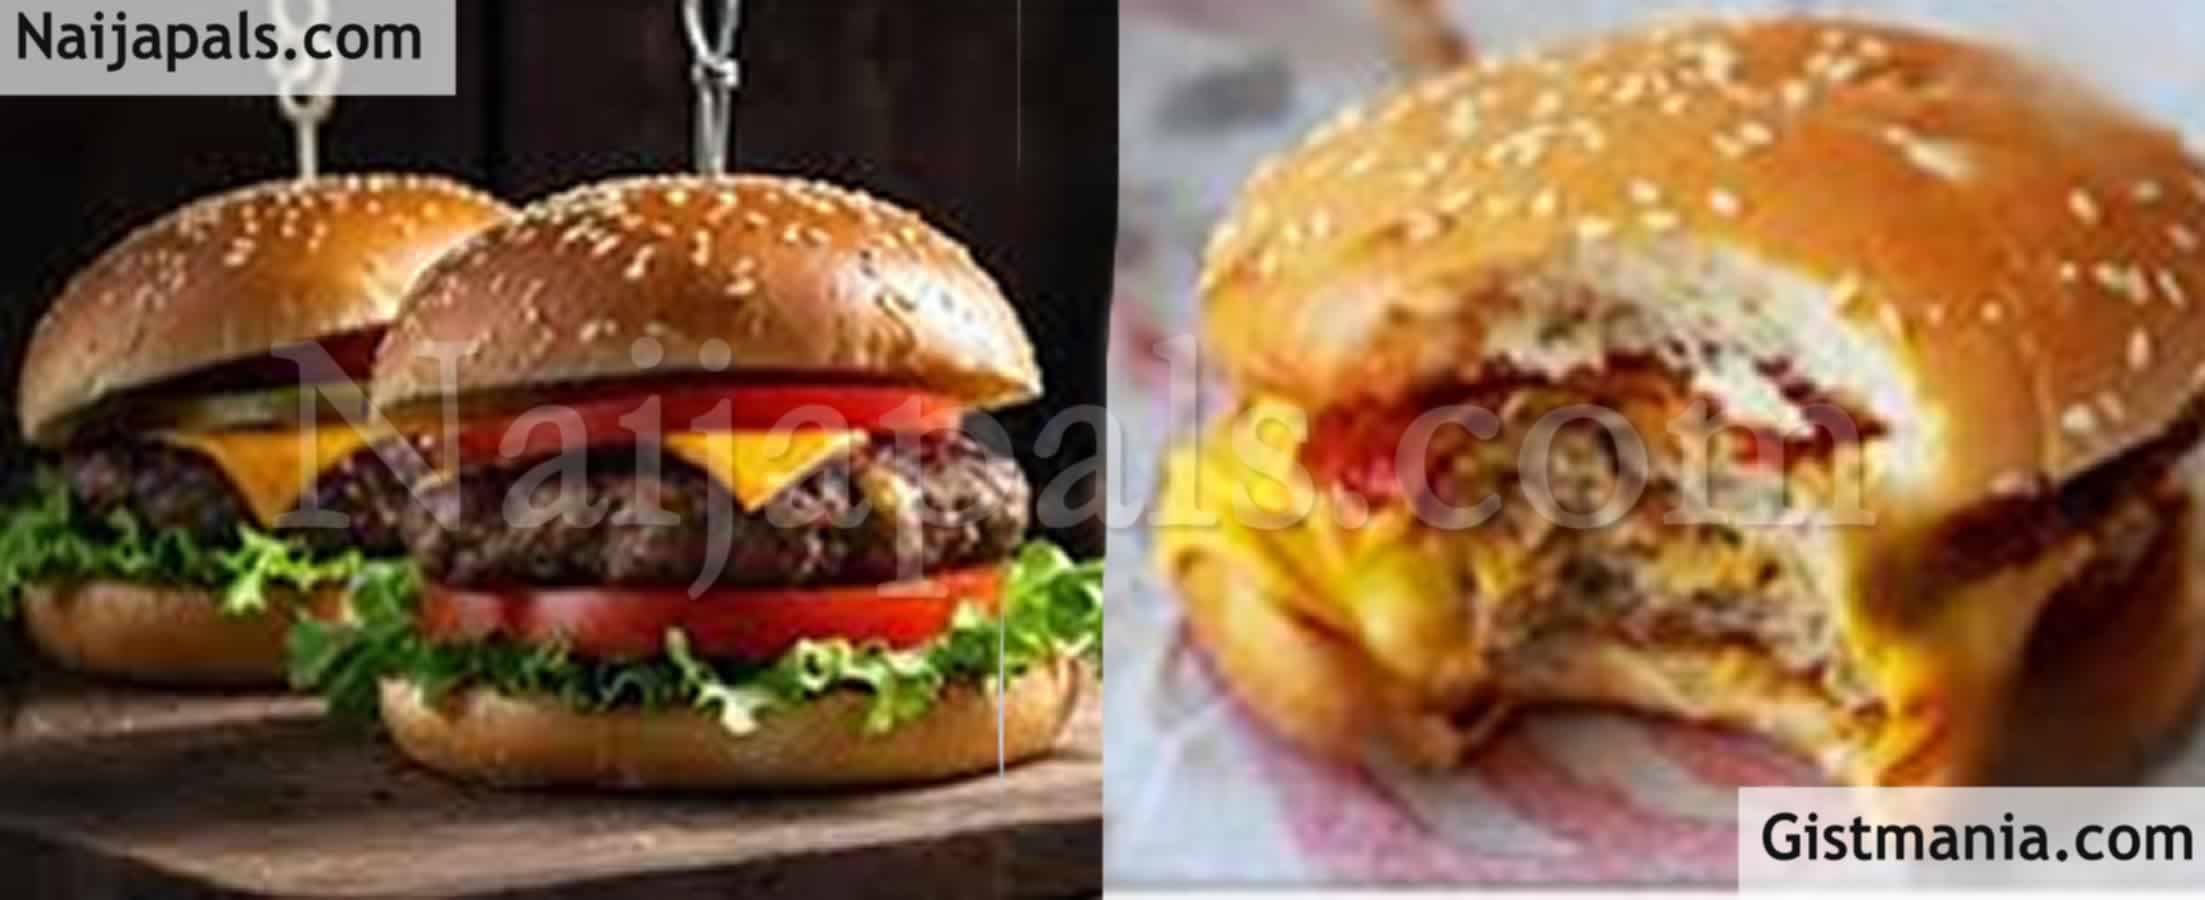 Man Shoots His Friend Dead For Taking a Bite Out of His Girlfriend’s Burger